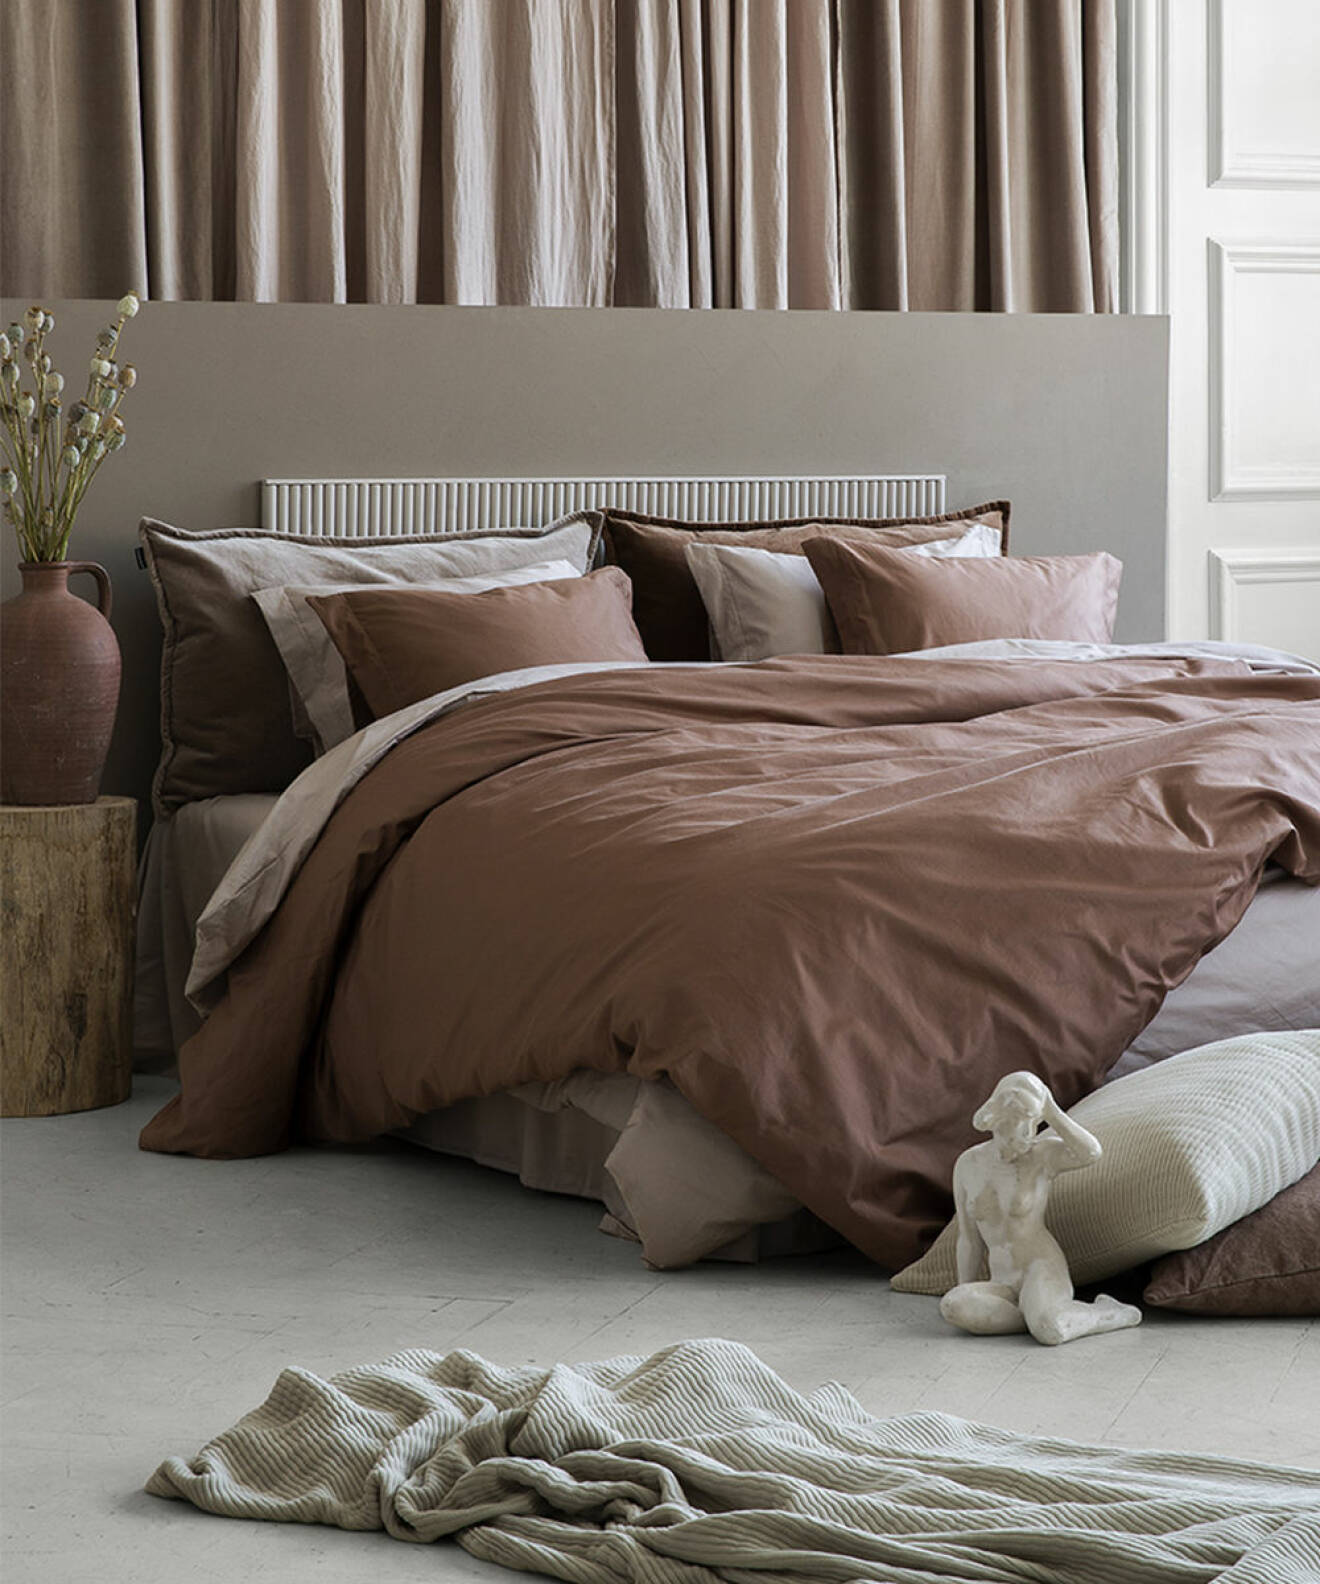 Granits premium collection med muted tones